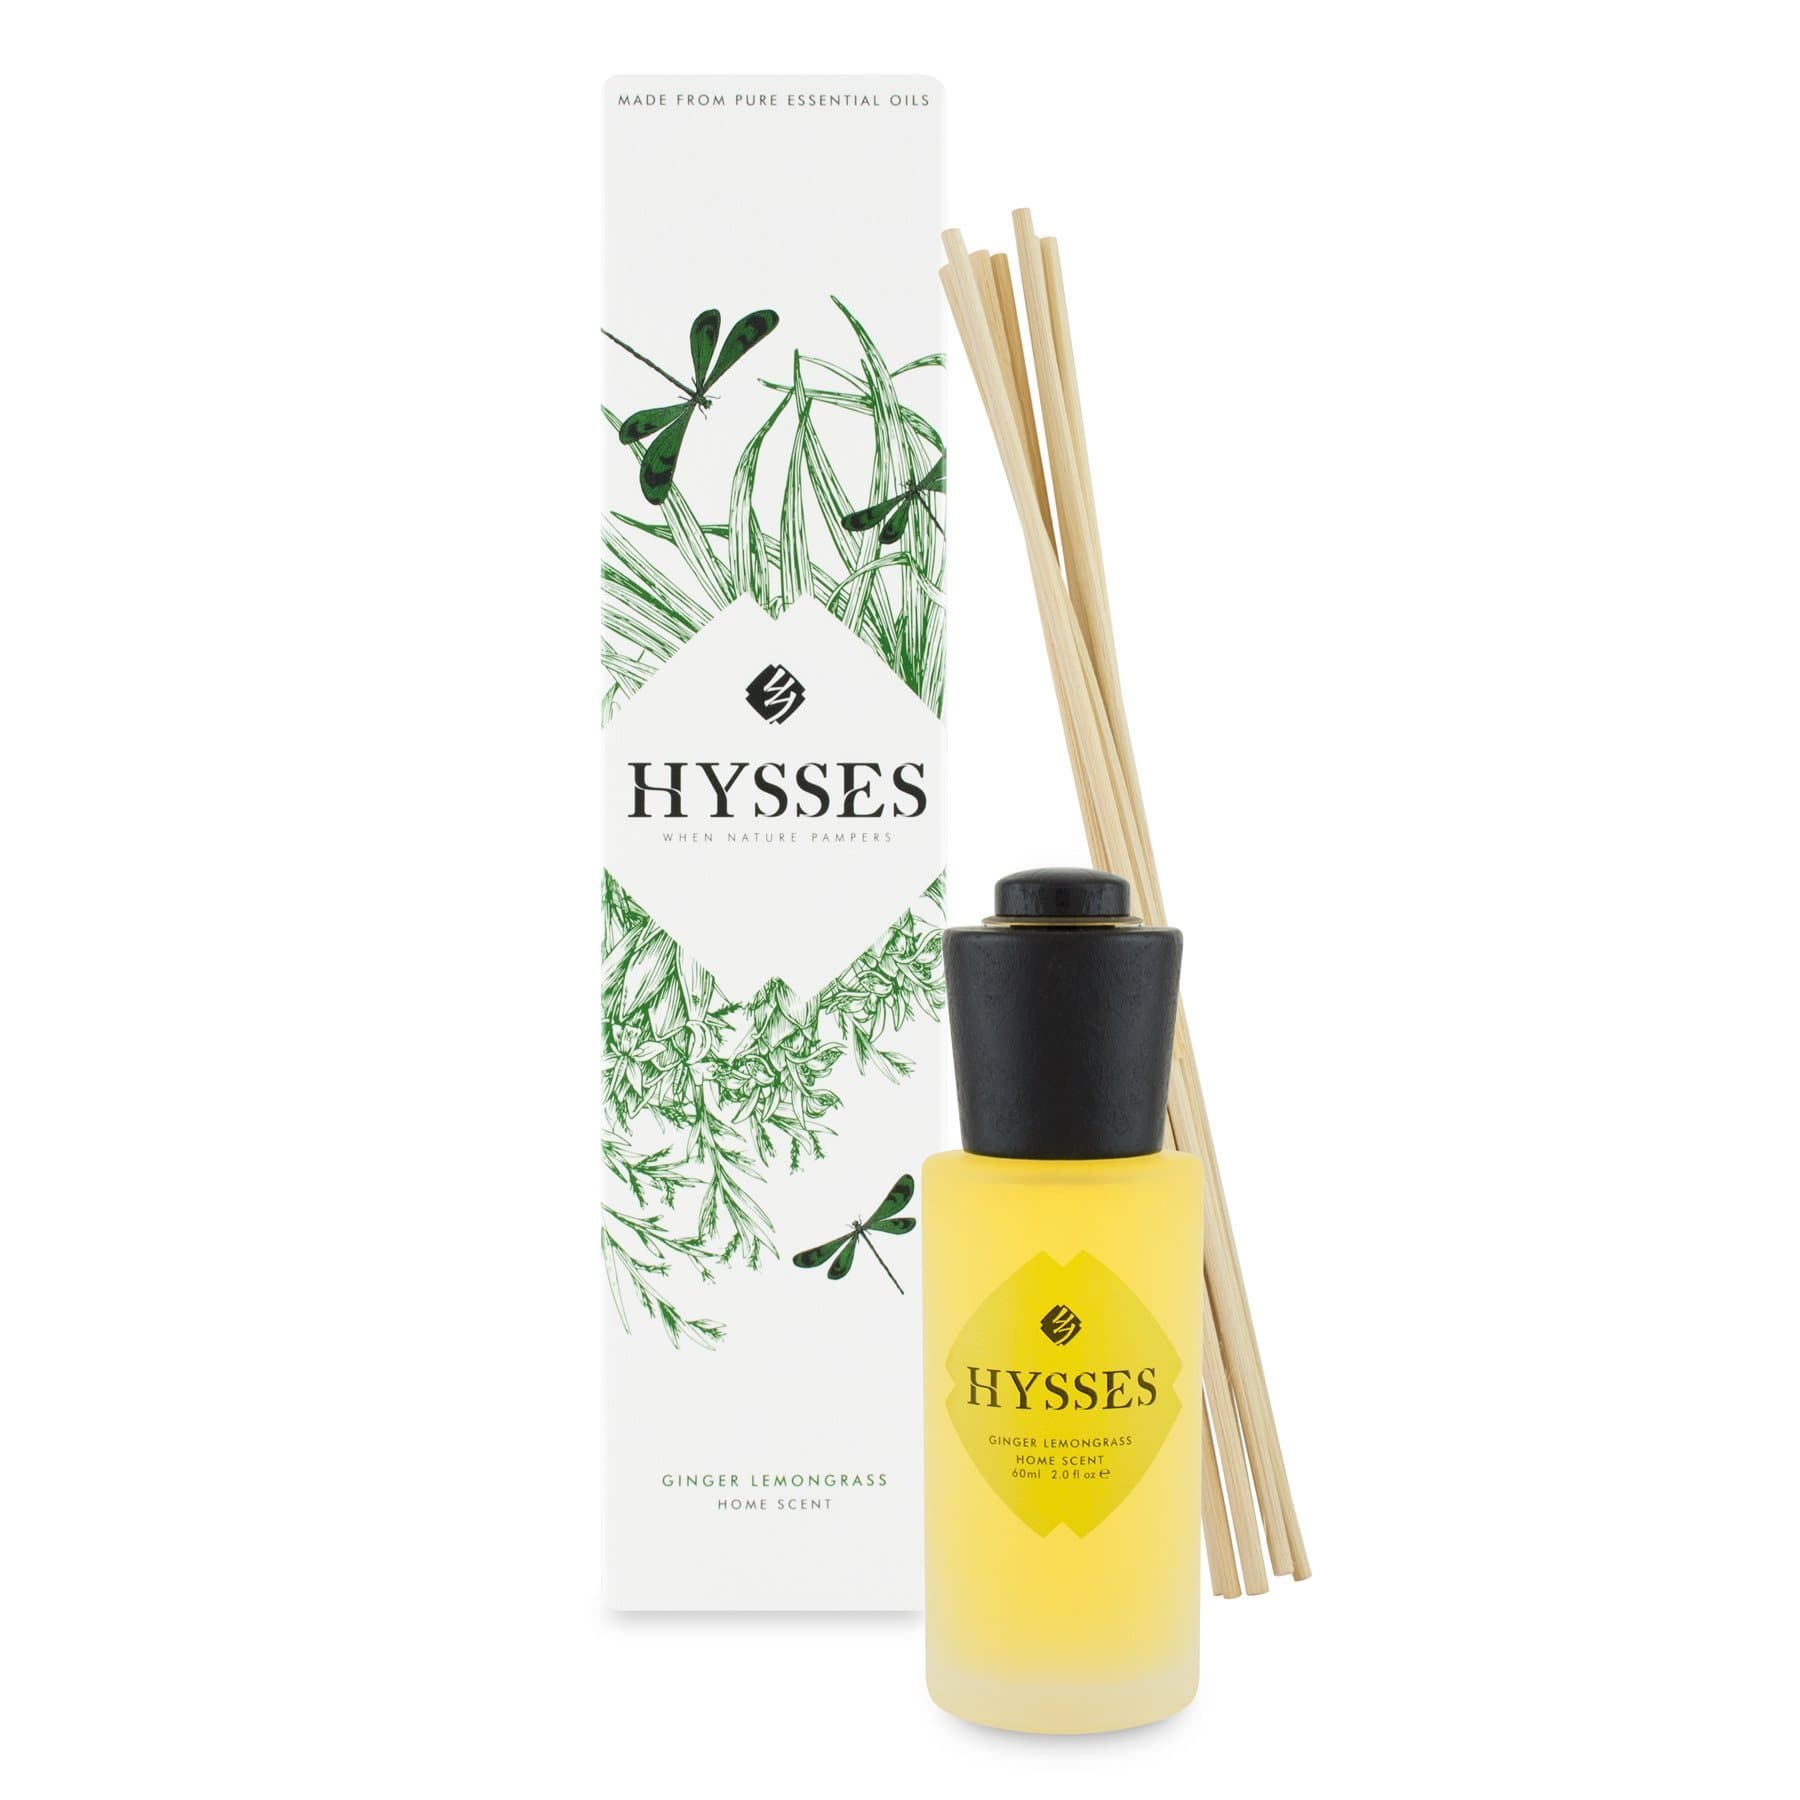 Hysses Home Scents 60ml Home Scent Reed Diffuser Ginger Lemongrass